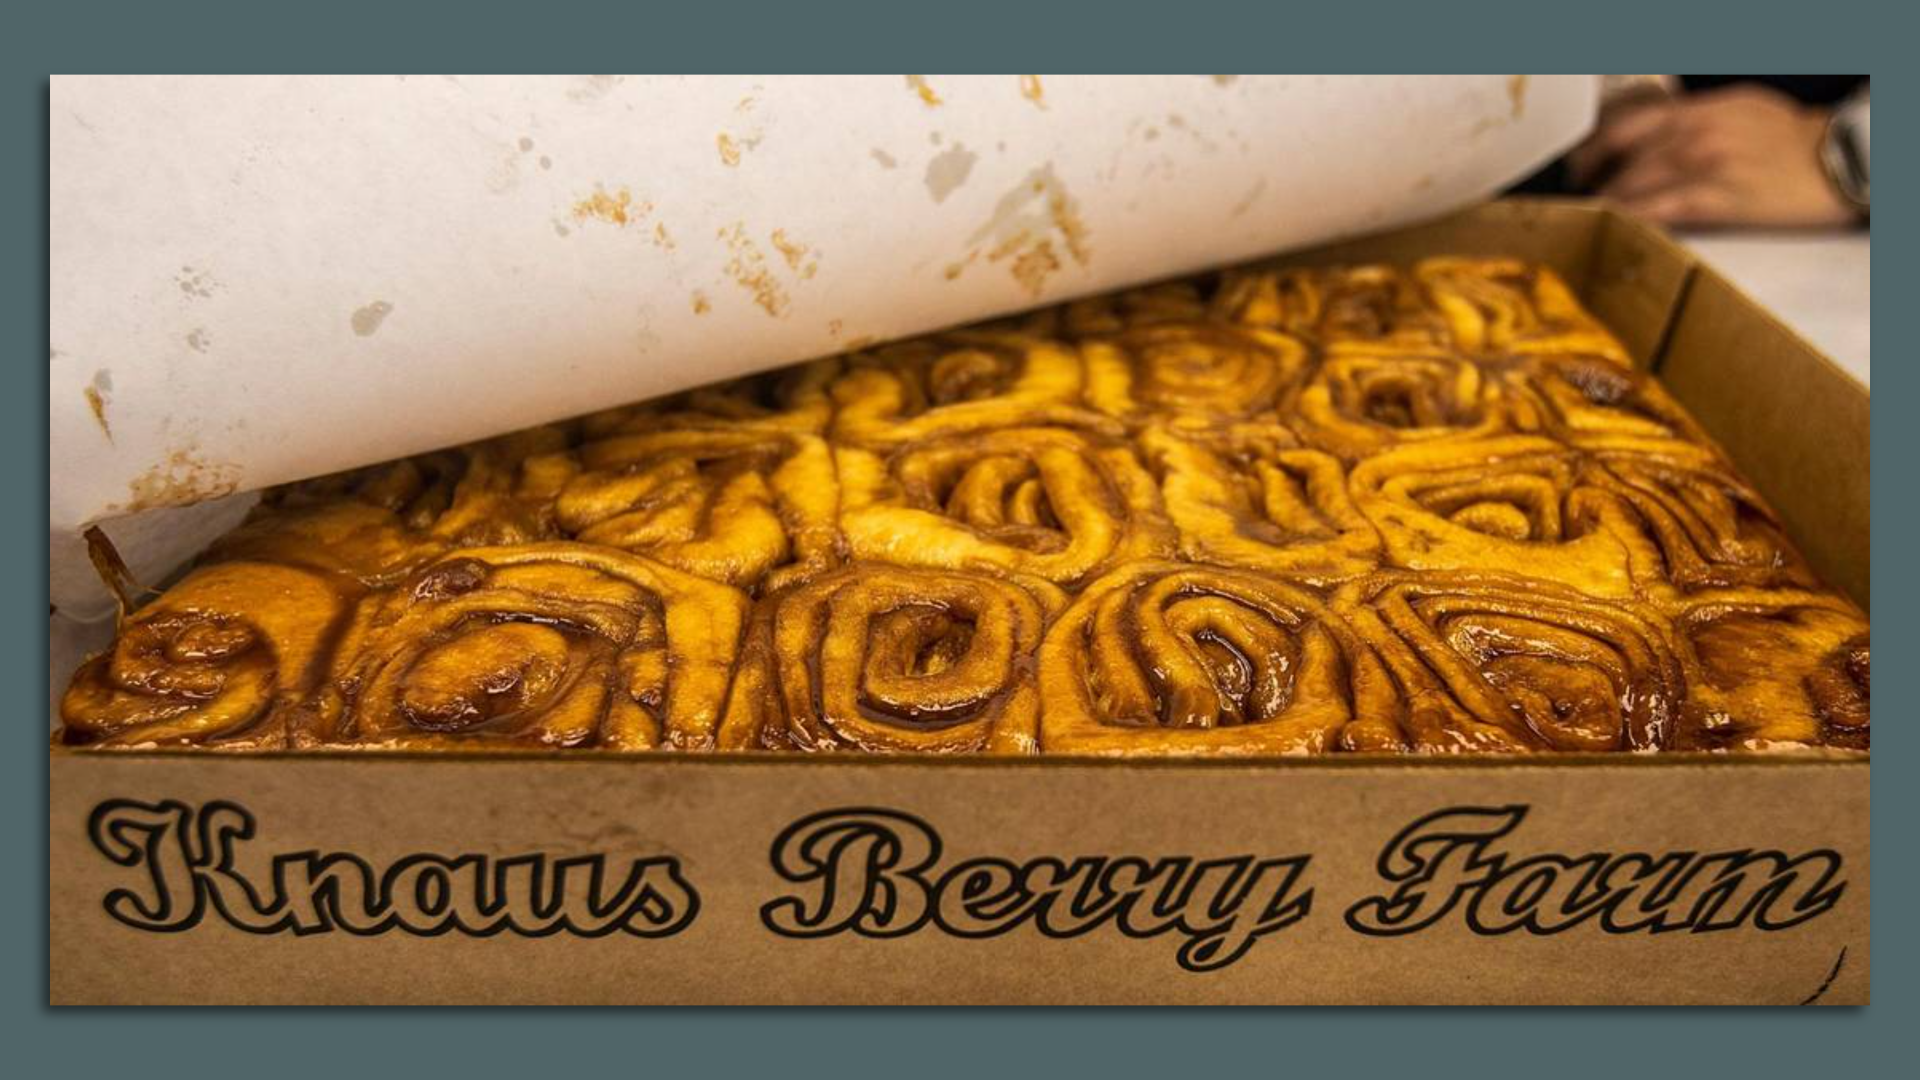 The famous homemade cinnamon rolls from Knaus Berry Farm in Homestead. 